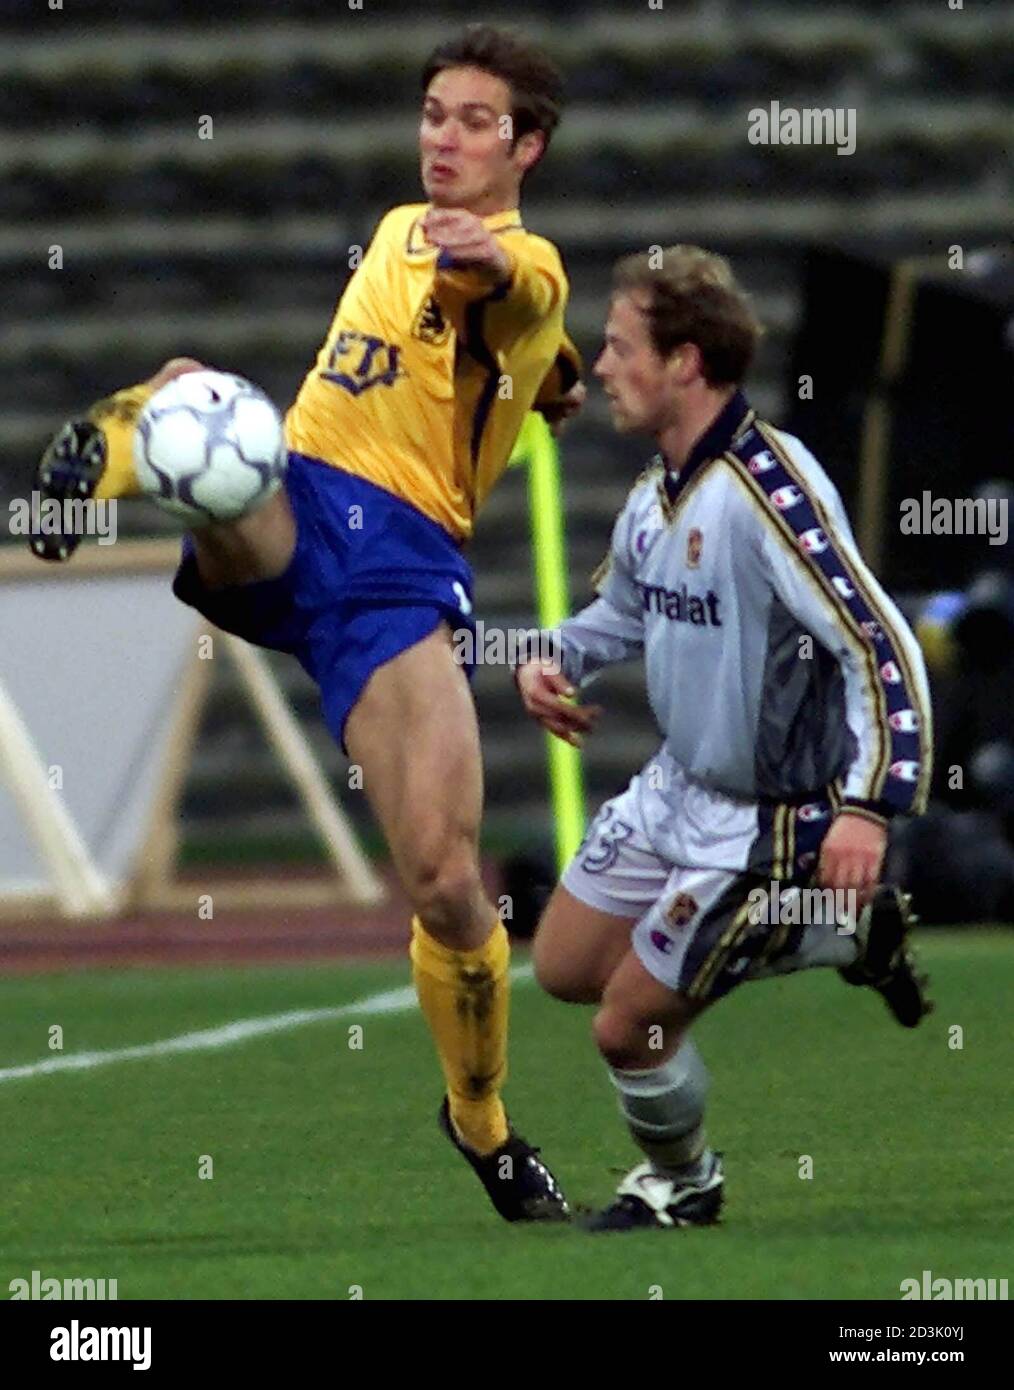 Harald Cerny (L) of TSV 1860 Munich challenges Gianluca Falsini of AC Parma during their third round, second leg UEFA Cup soccer match in Munich's Olympic stadium, December 5, 2000.  MAD Stock Photo